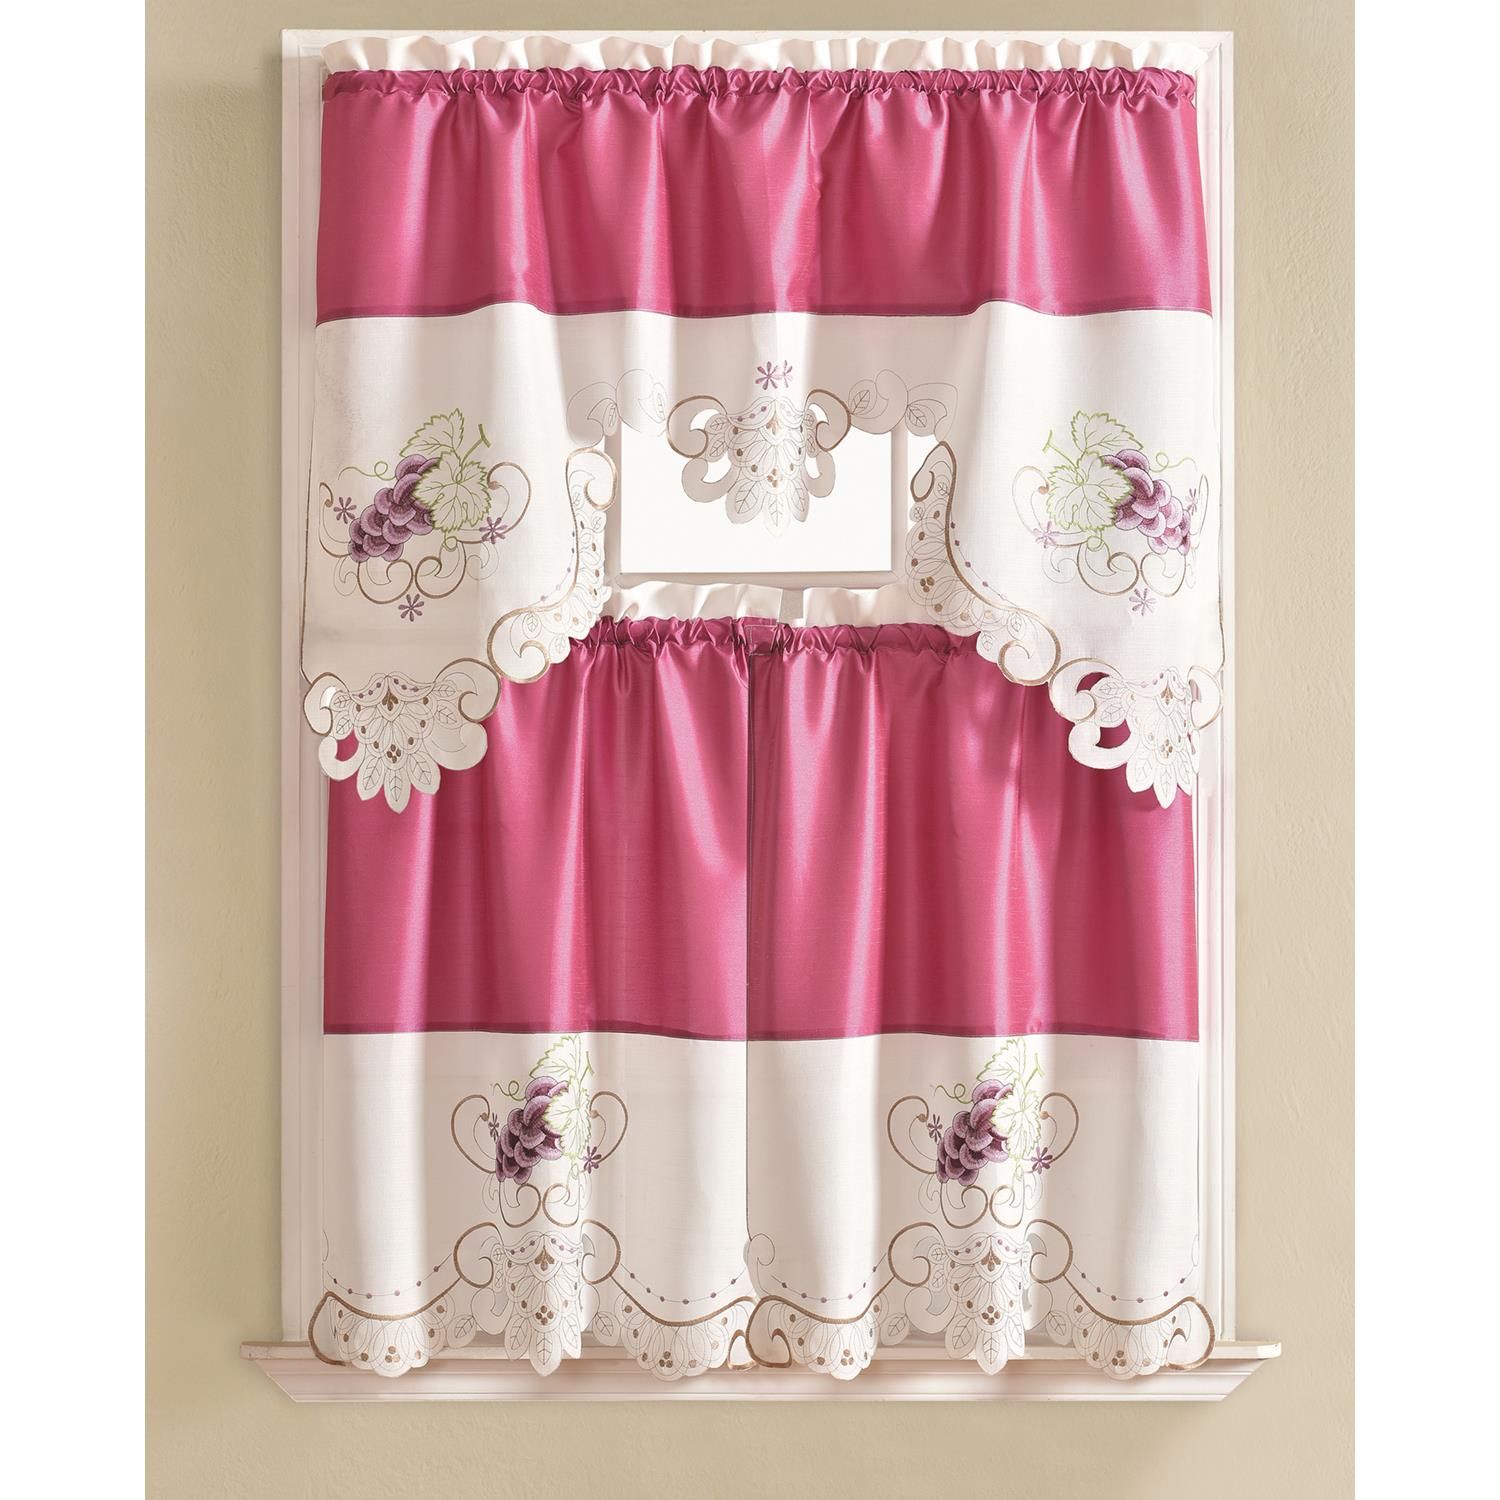 Details About Noble Embroidered Grape Tier And Valance Kitchen Curtain Set Pertaining To Urban Embroidered Tier And Valance Kitchen Curtain Tier Sets (View 5 of 20)